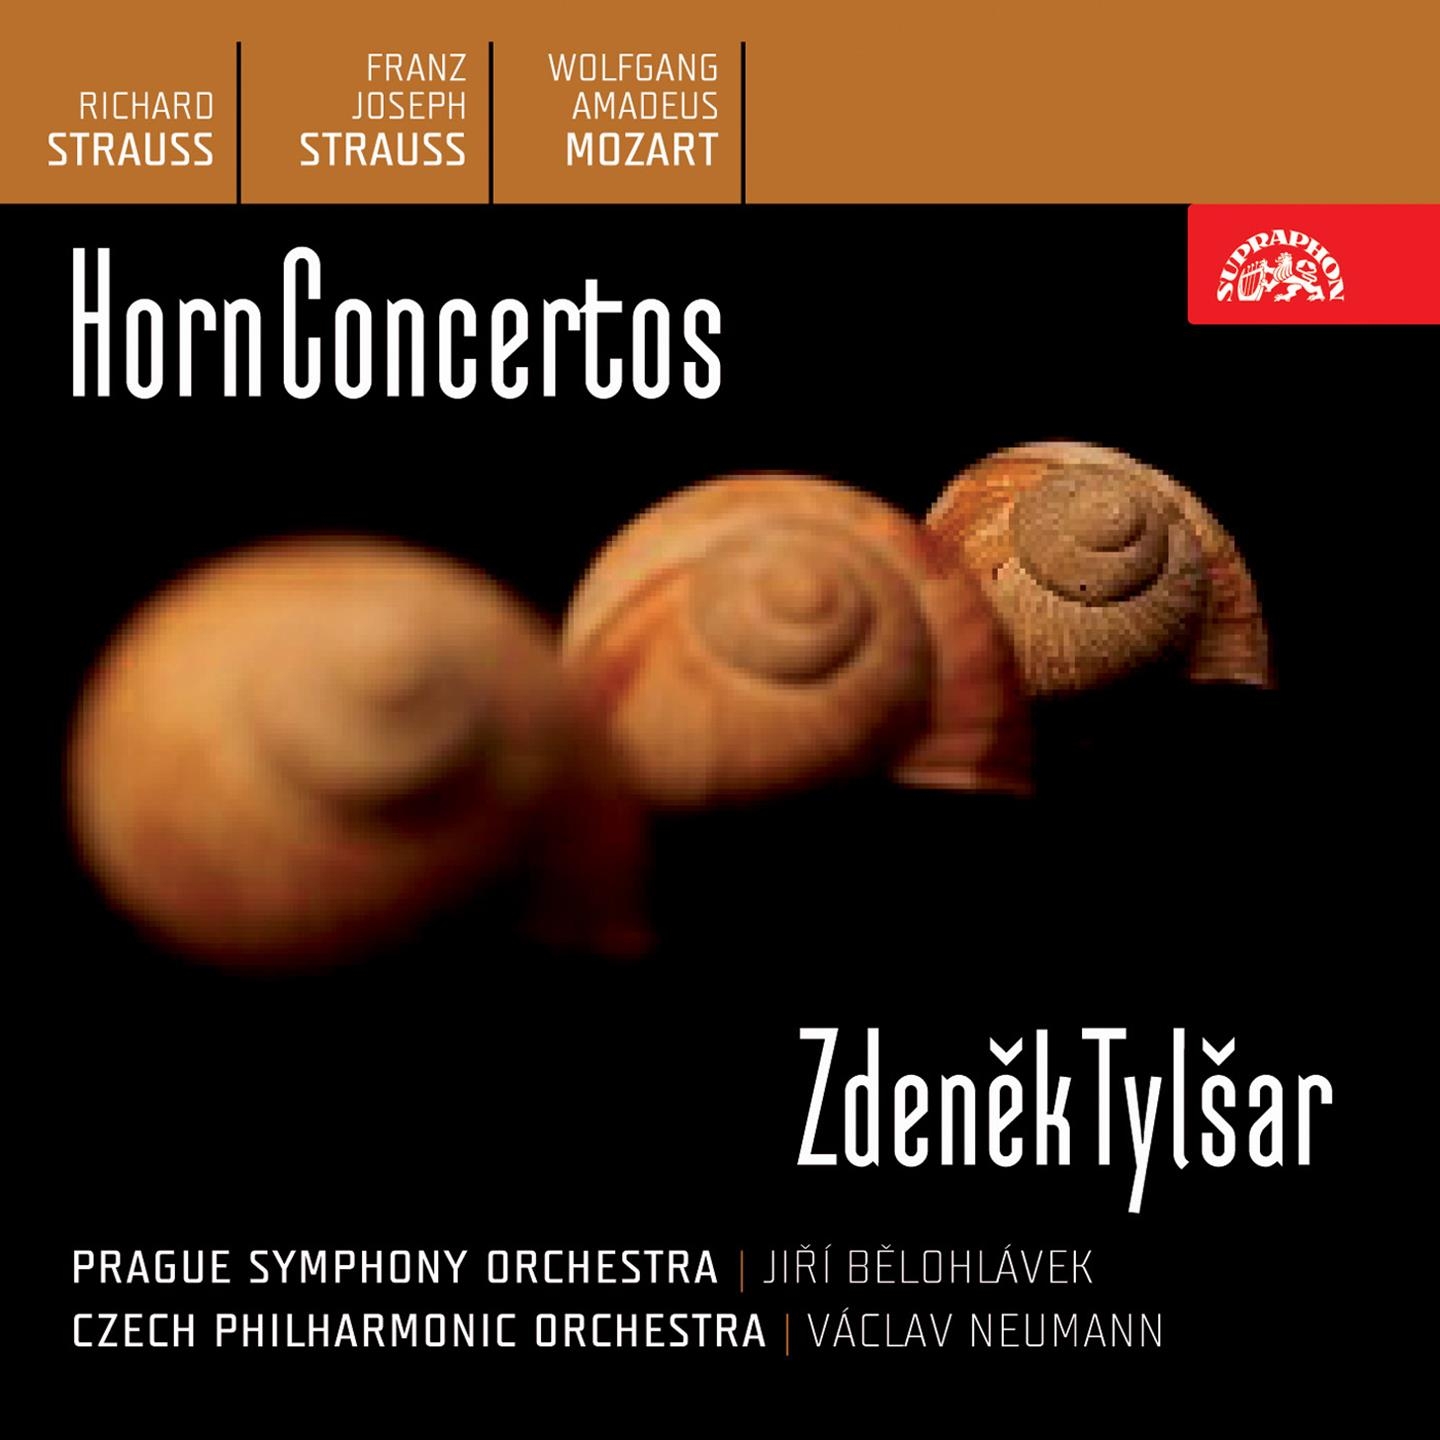 Concerto for French Horn and Orchestra in C-Sharp Minor, Op. 8, .: I. Allegro moderato